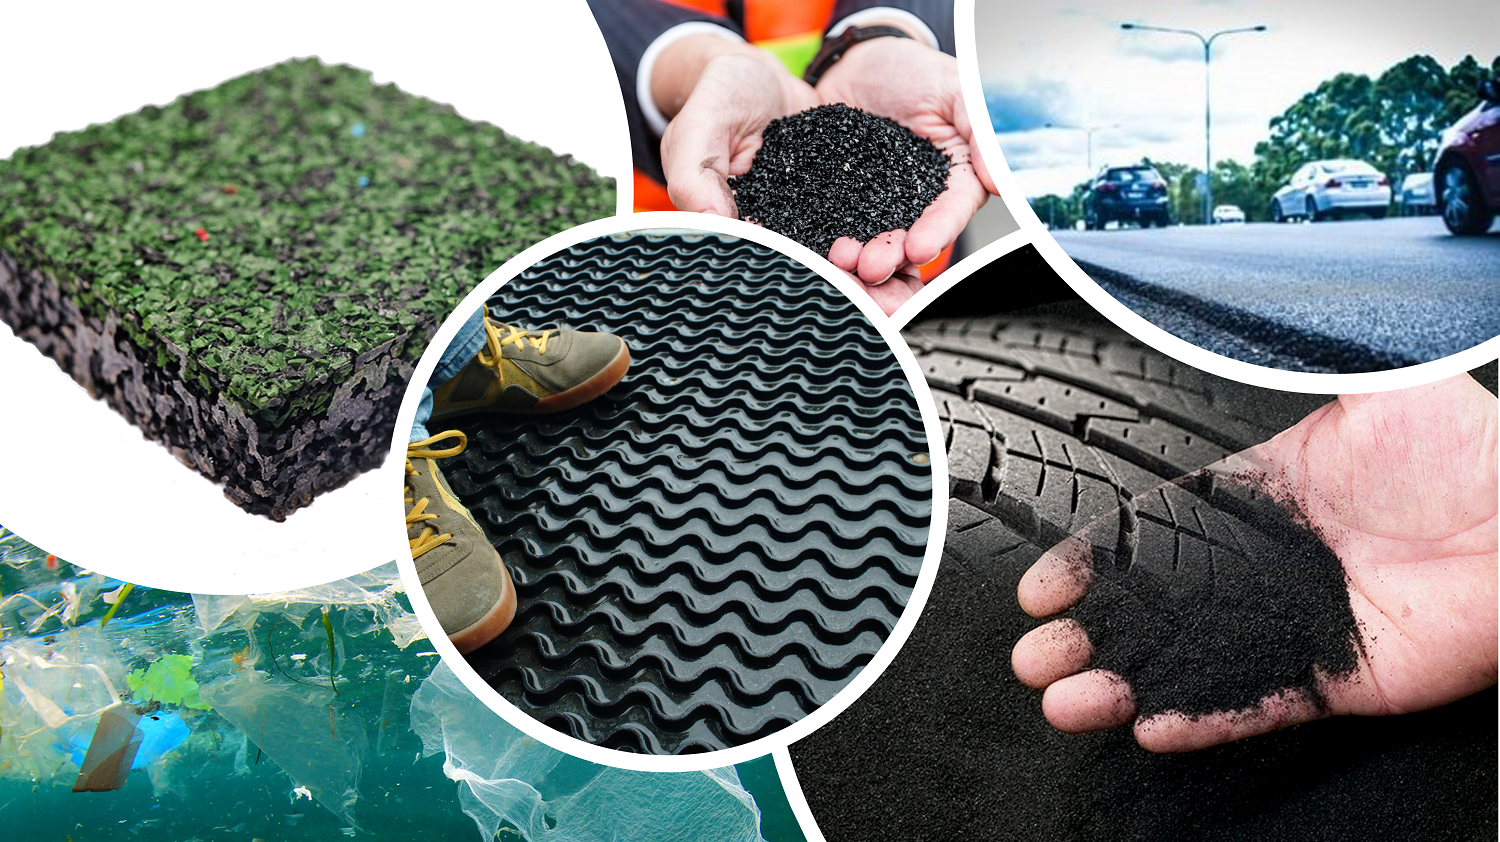 New report highlights risks to be understood and managed for sustainable end-of-life tyre resource recovery and applications